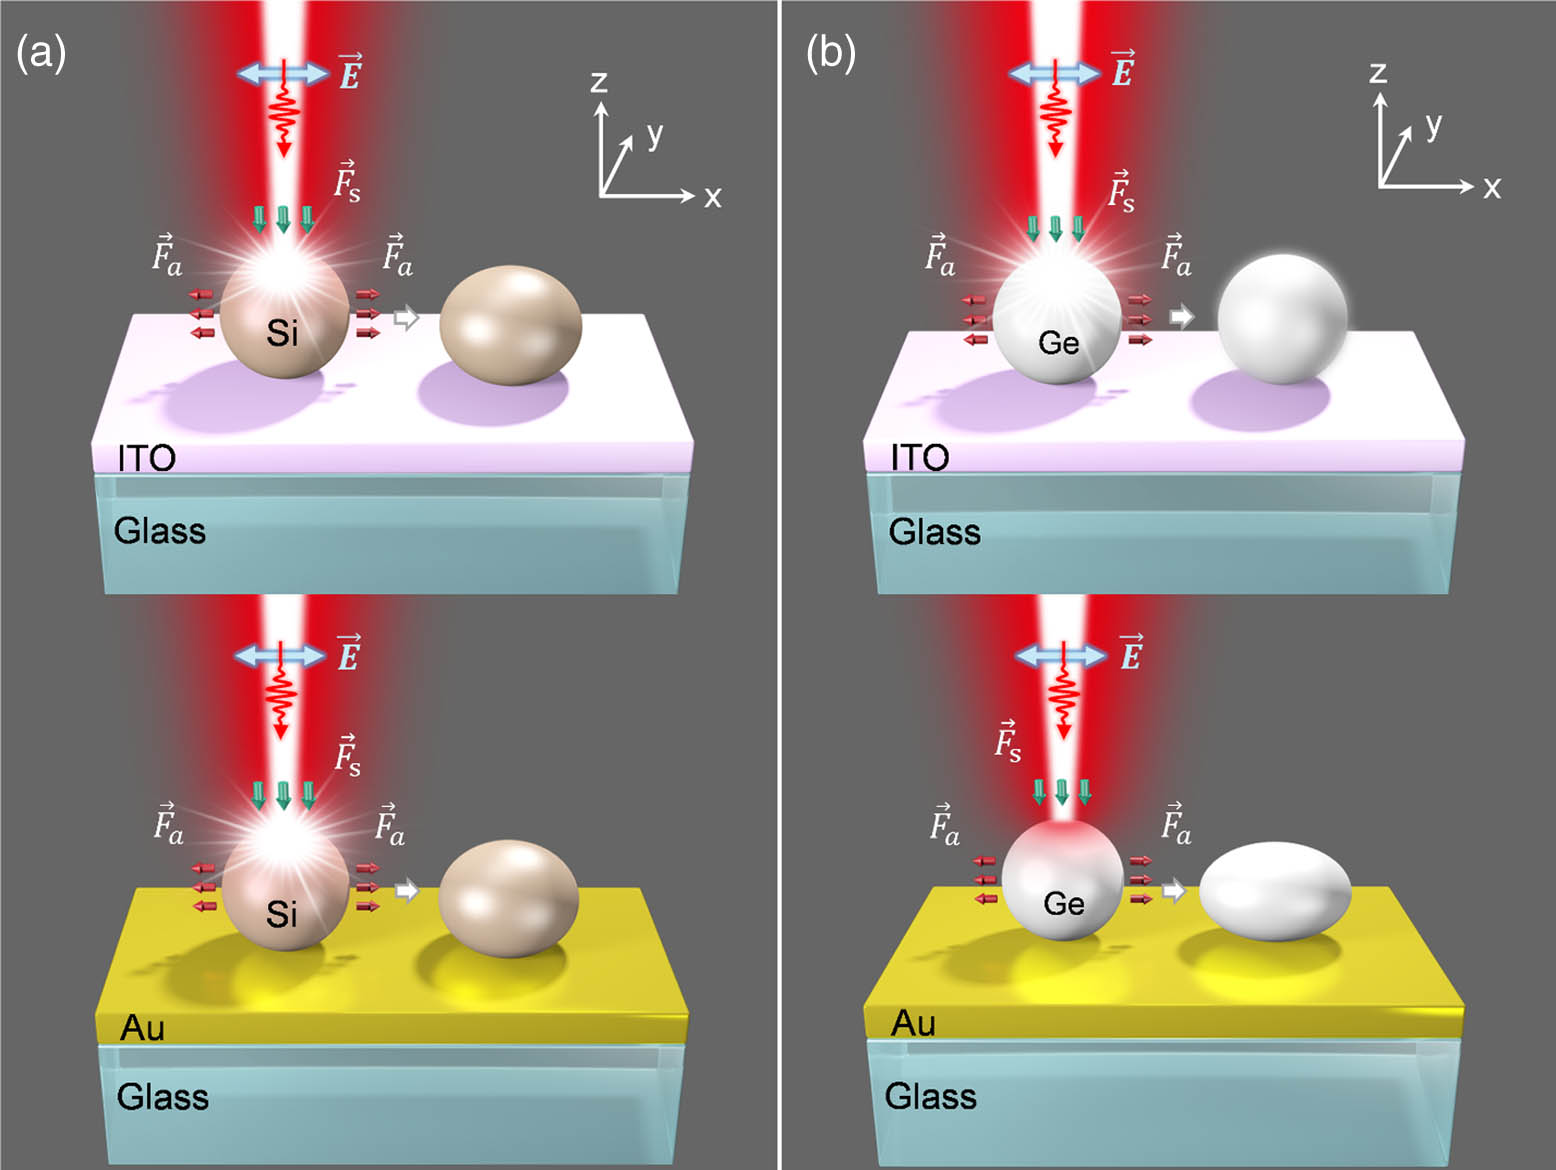 (a) Schematic showing the controllable shaping of a spherical Si nanoparticle placed on an ITO/SiO2 or an Au/SiO2 substrate into an ellipsoidal one by using femtosecond laser pulses. (b) Schematic showing the controllable transformation of a spherical Ge nanoparticle placed on an Au/SiO2 substrate into an ellipsoidal one by using femtosecond laser pulses. A spherical Ge nanoparticle placed on an ITO/SiO2 substrate cannot be shaped by femtosecond laser pulses because of melting of the Ge nanoparticle.